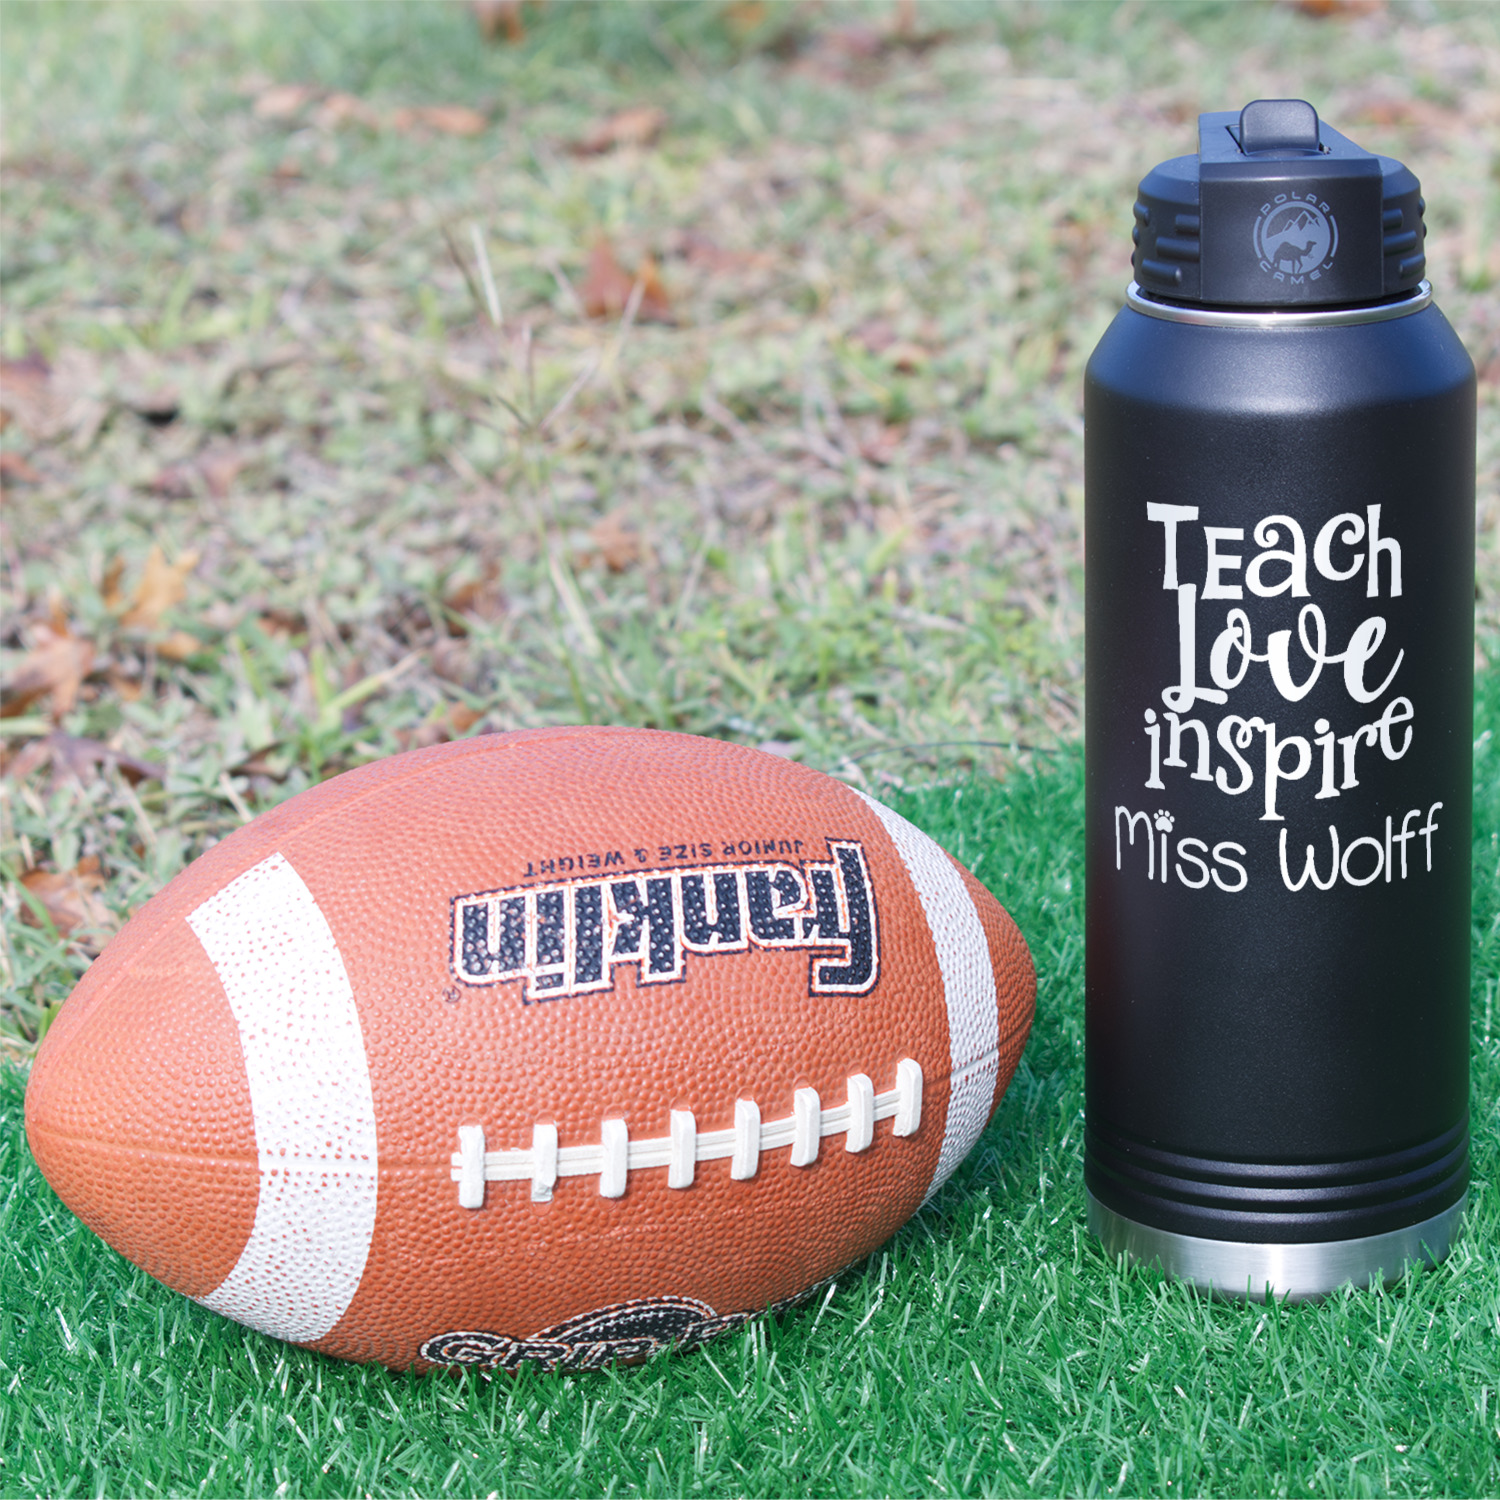 https://www.youcustomizeit.com/common/MAKE/1038343/Teacher-Quote-Laser-Engraved-Water-Bottles-In-Context.jpg?lm=1667407687